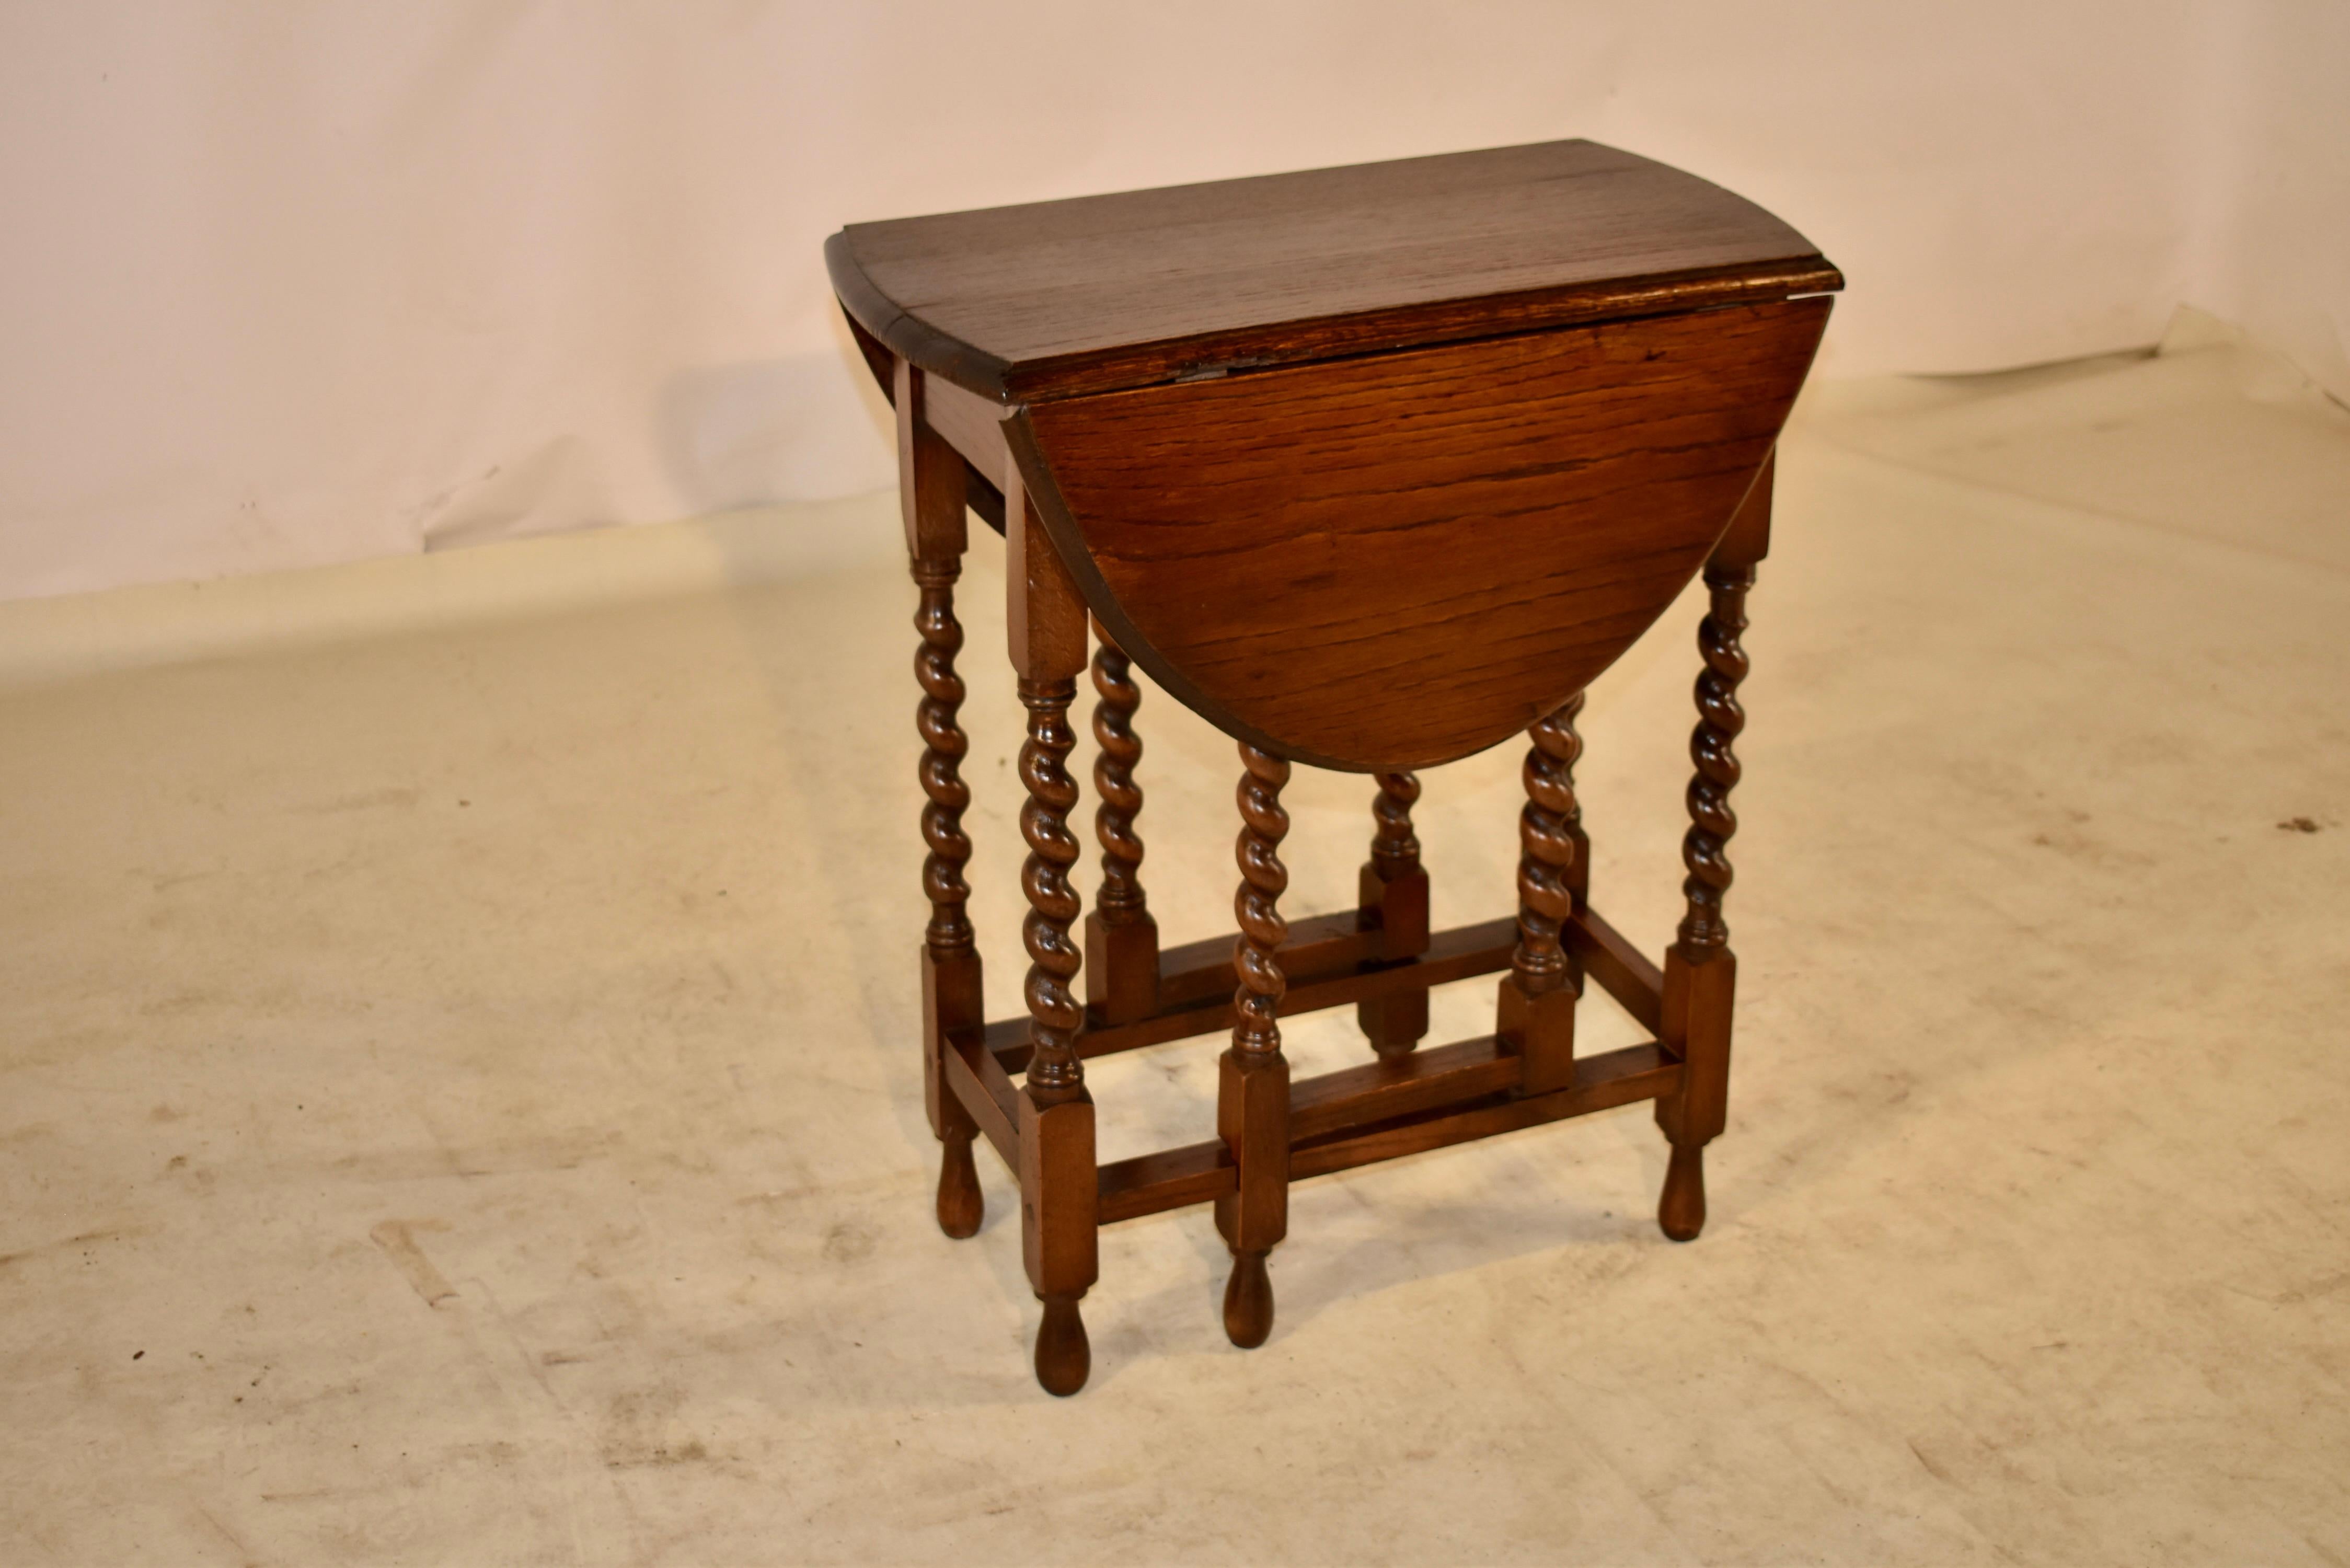 Edwardian oak side table from England with two gate legs. The top has a beveled edge and follows down to simple aprons and supported on hand turned barley twist legs and gate legs. The legs are connected with simple stretchers and the table is